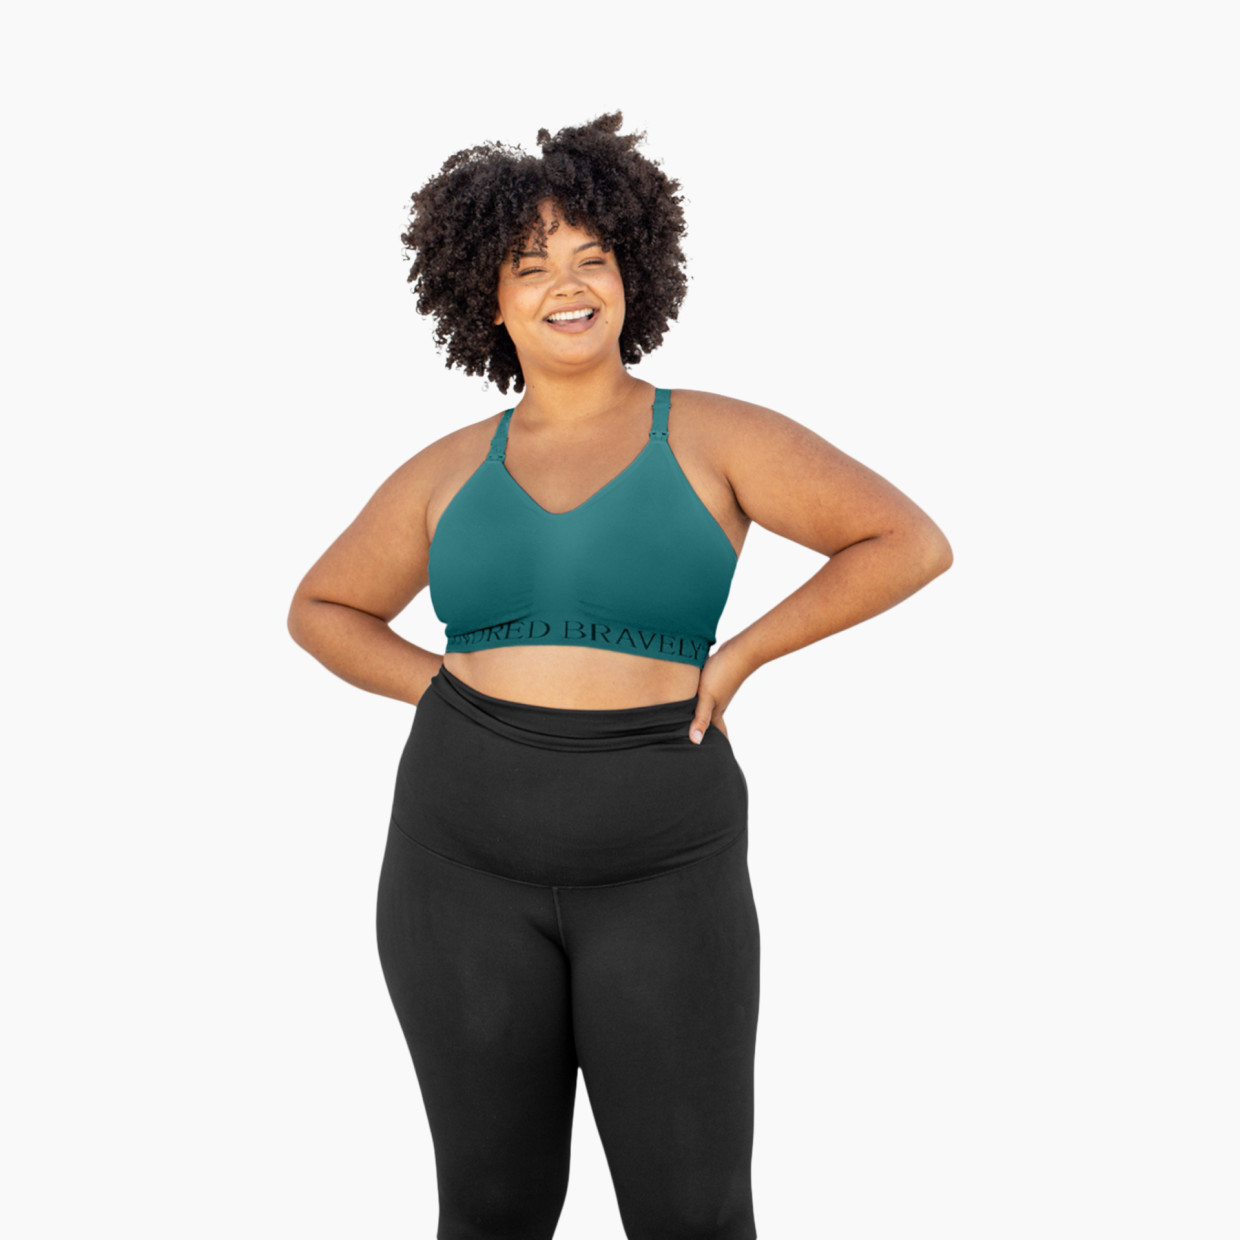 Kindred Bravely Sublime Hands-Free Pumping & Nursing Sports Bra - Teal, Small-Busty.